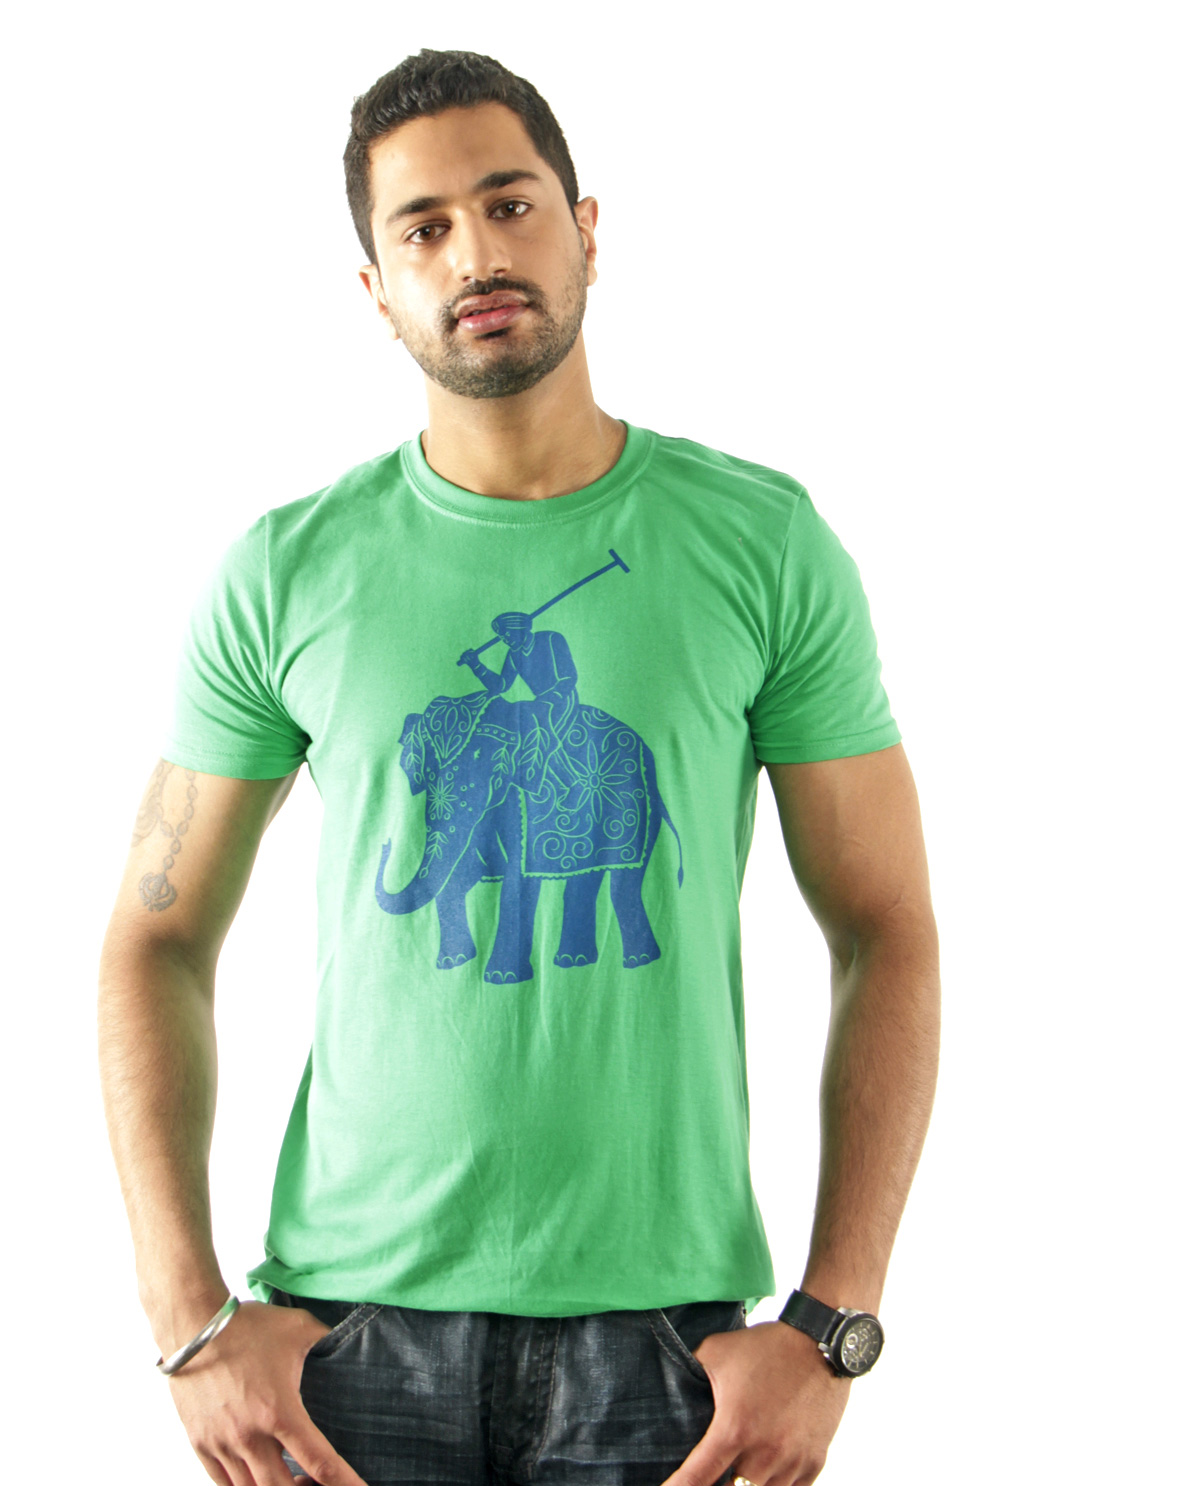 Elephant Polo graphic design short sleeved shirt being worn by South Asian male modeal. Graphic design t.shirts by Brown Man Clothing Co.